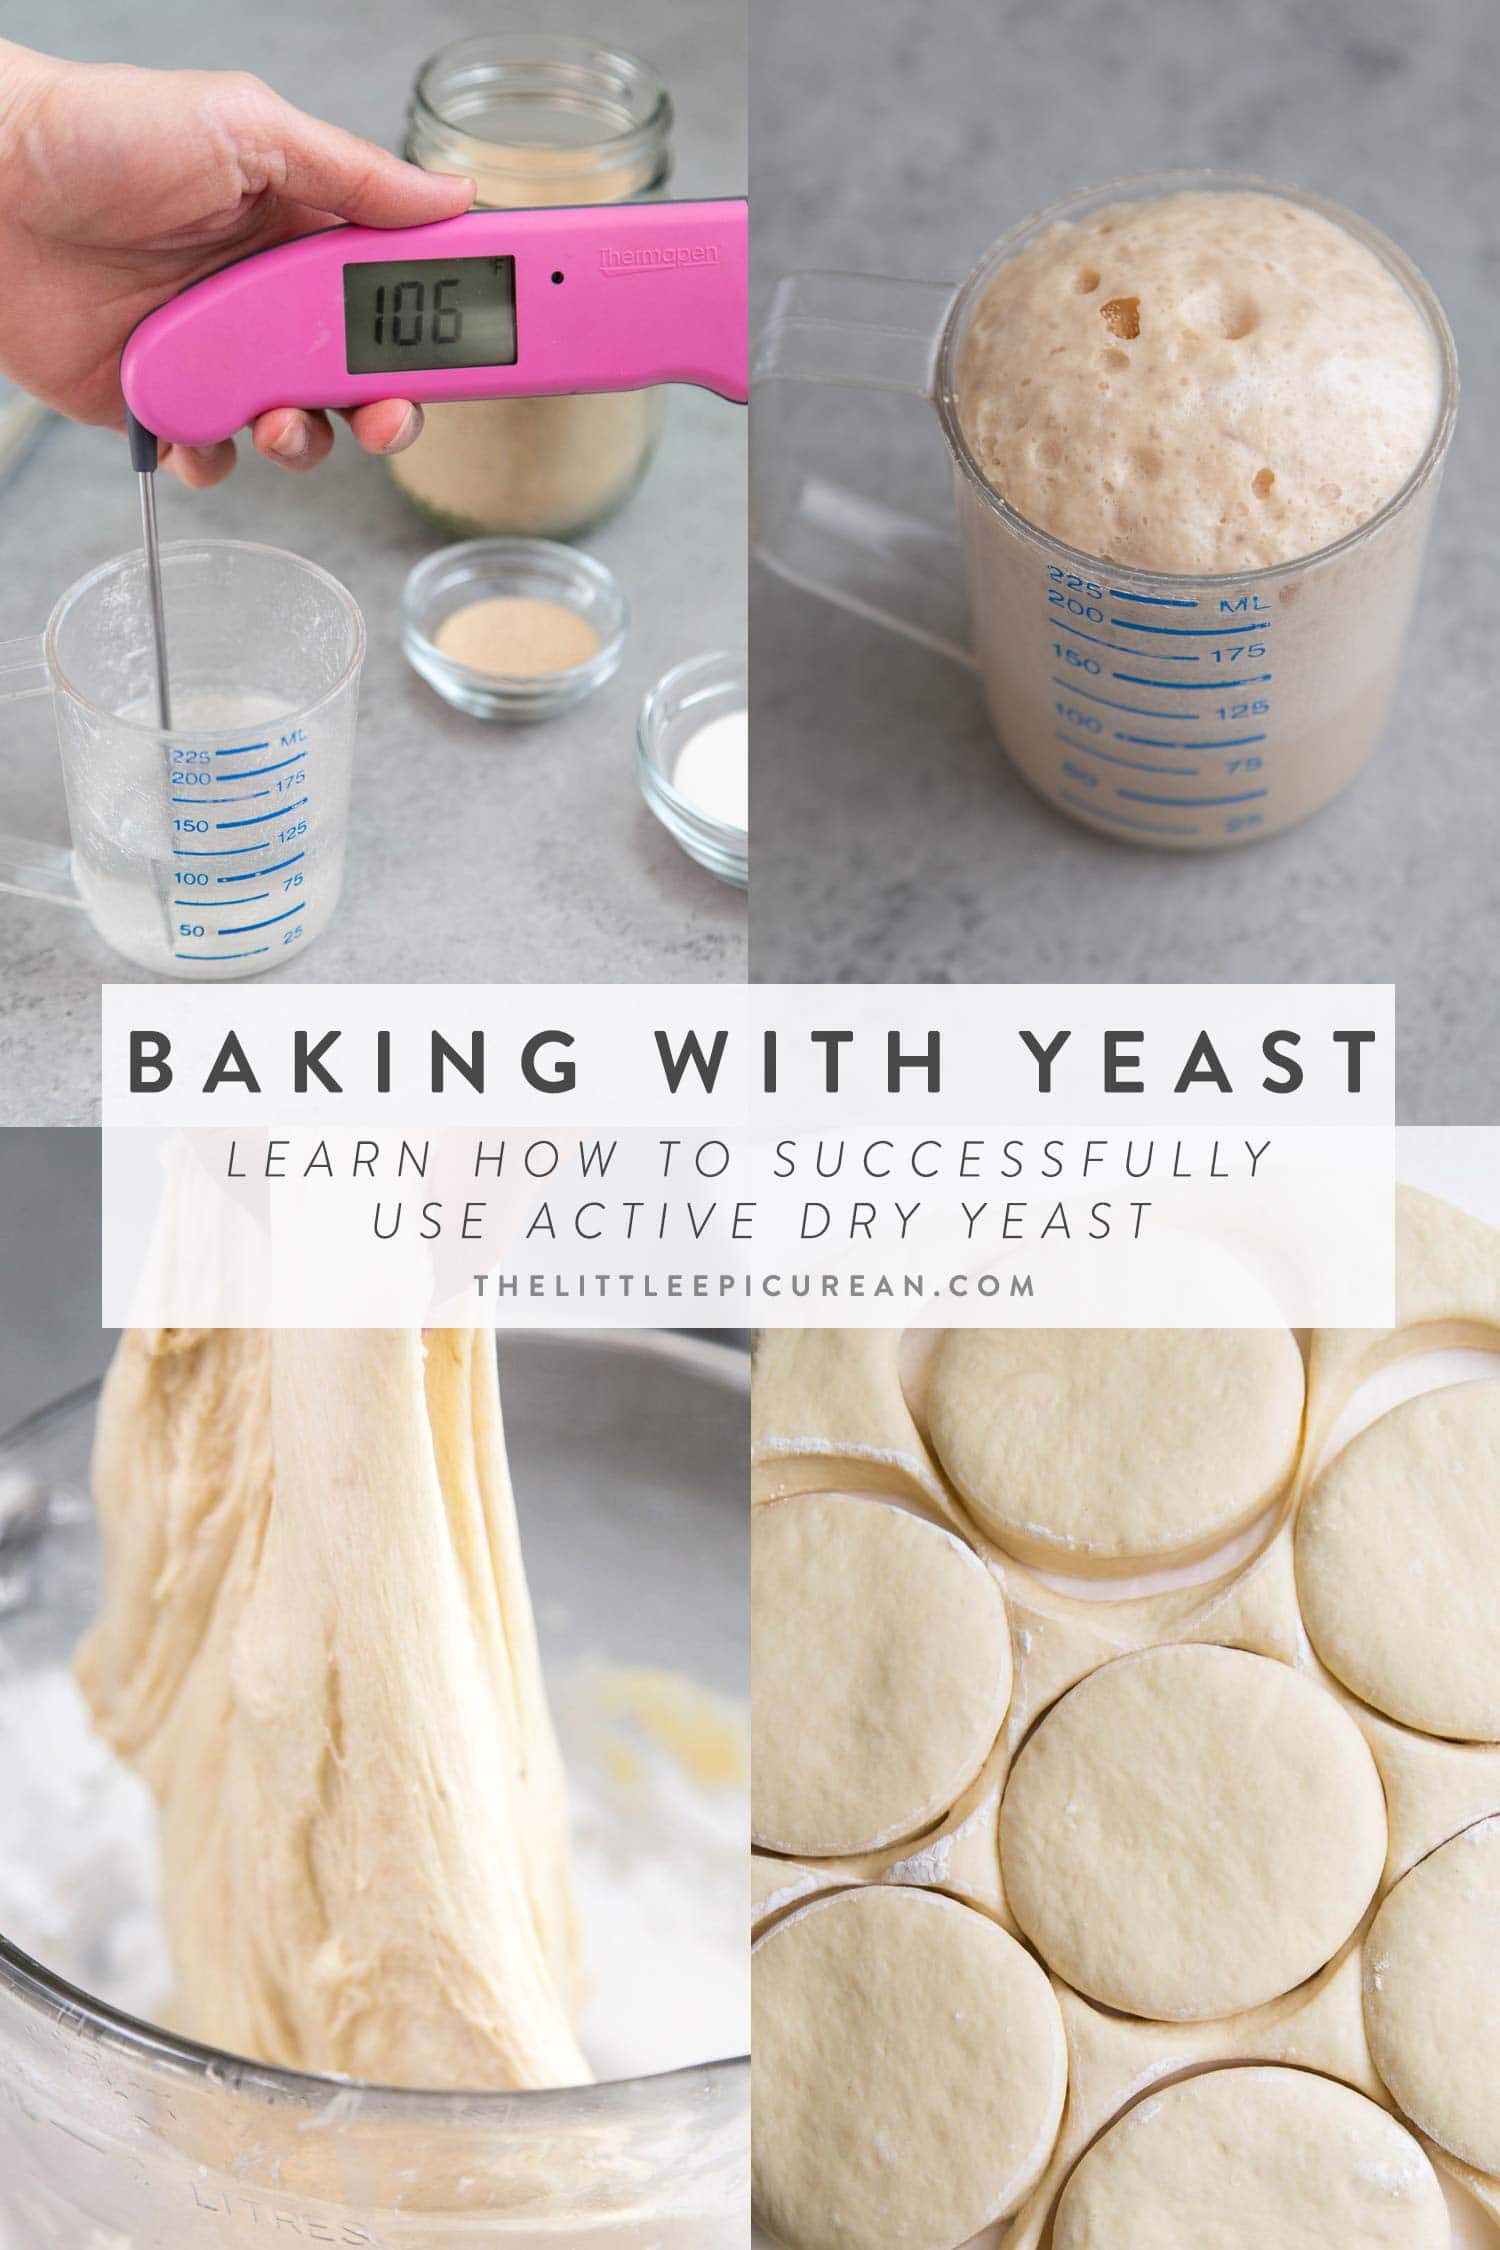 Guide to Baking With Yeast